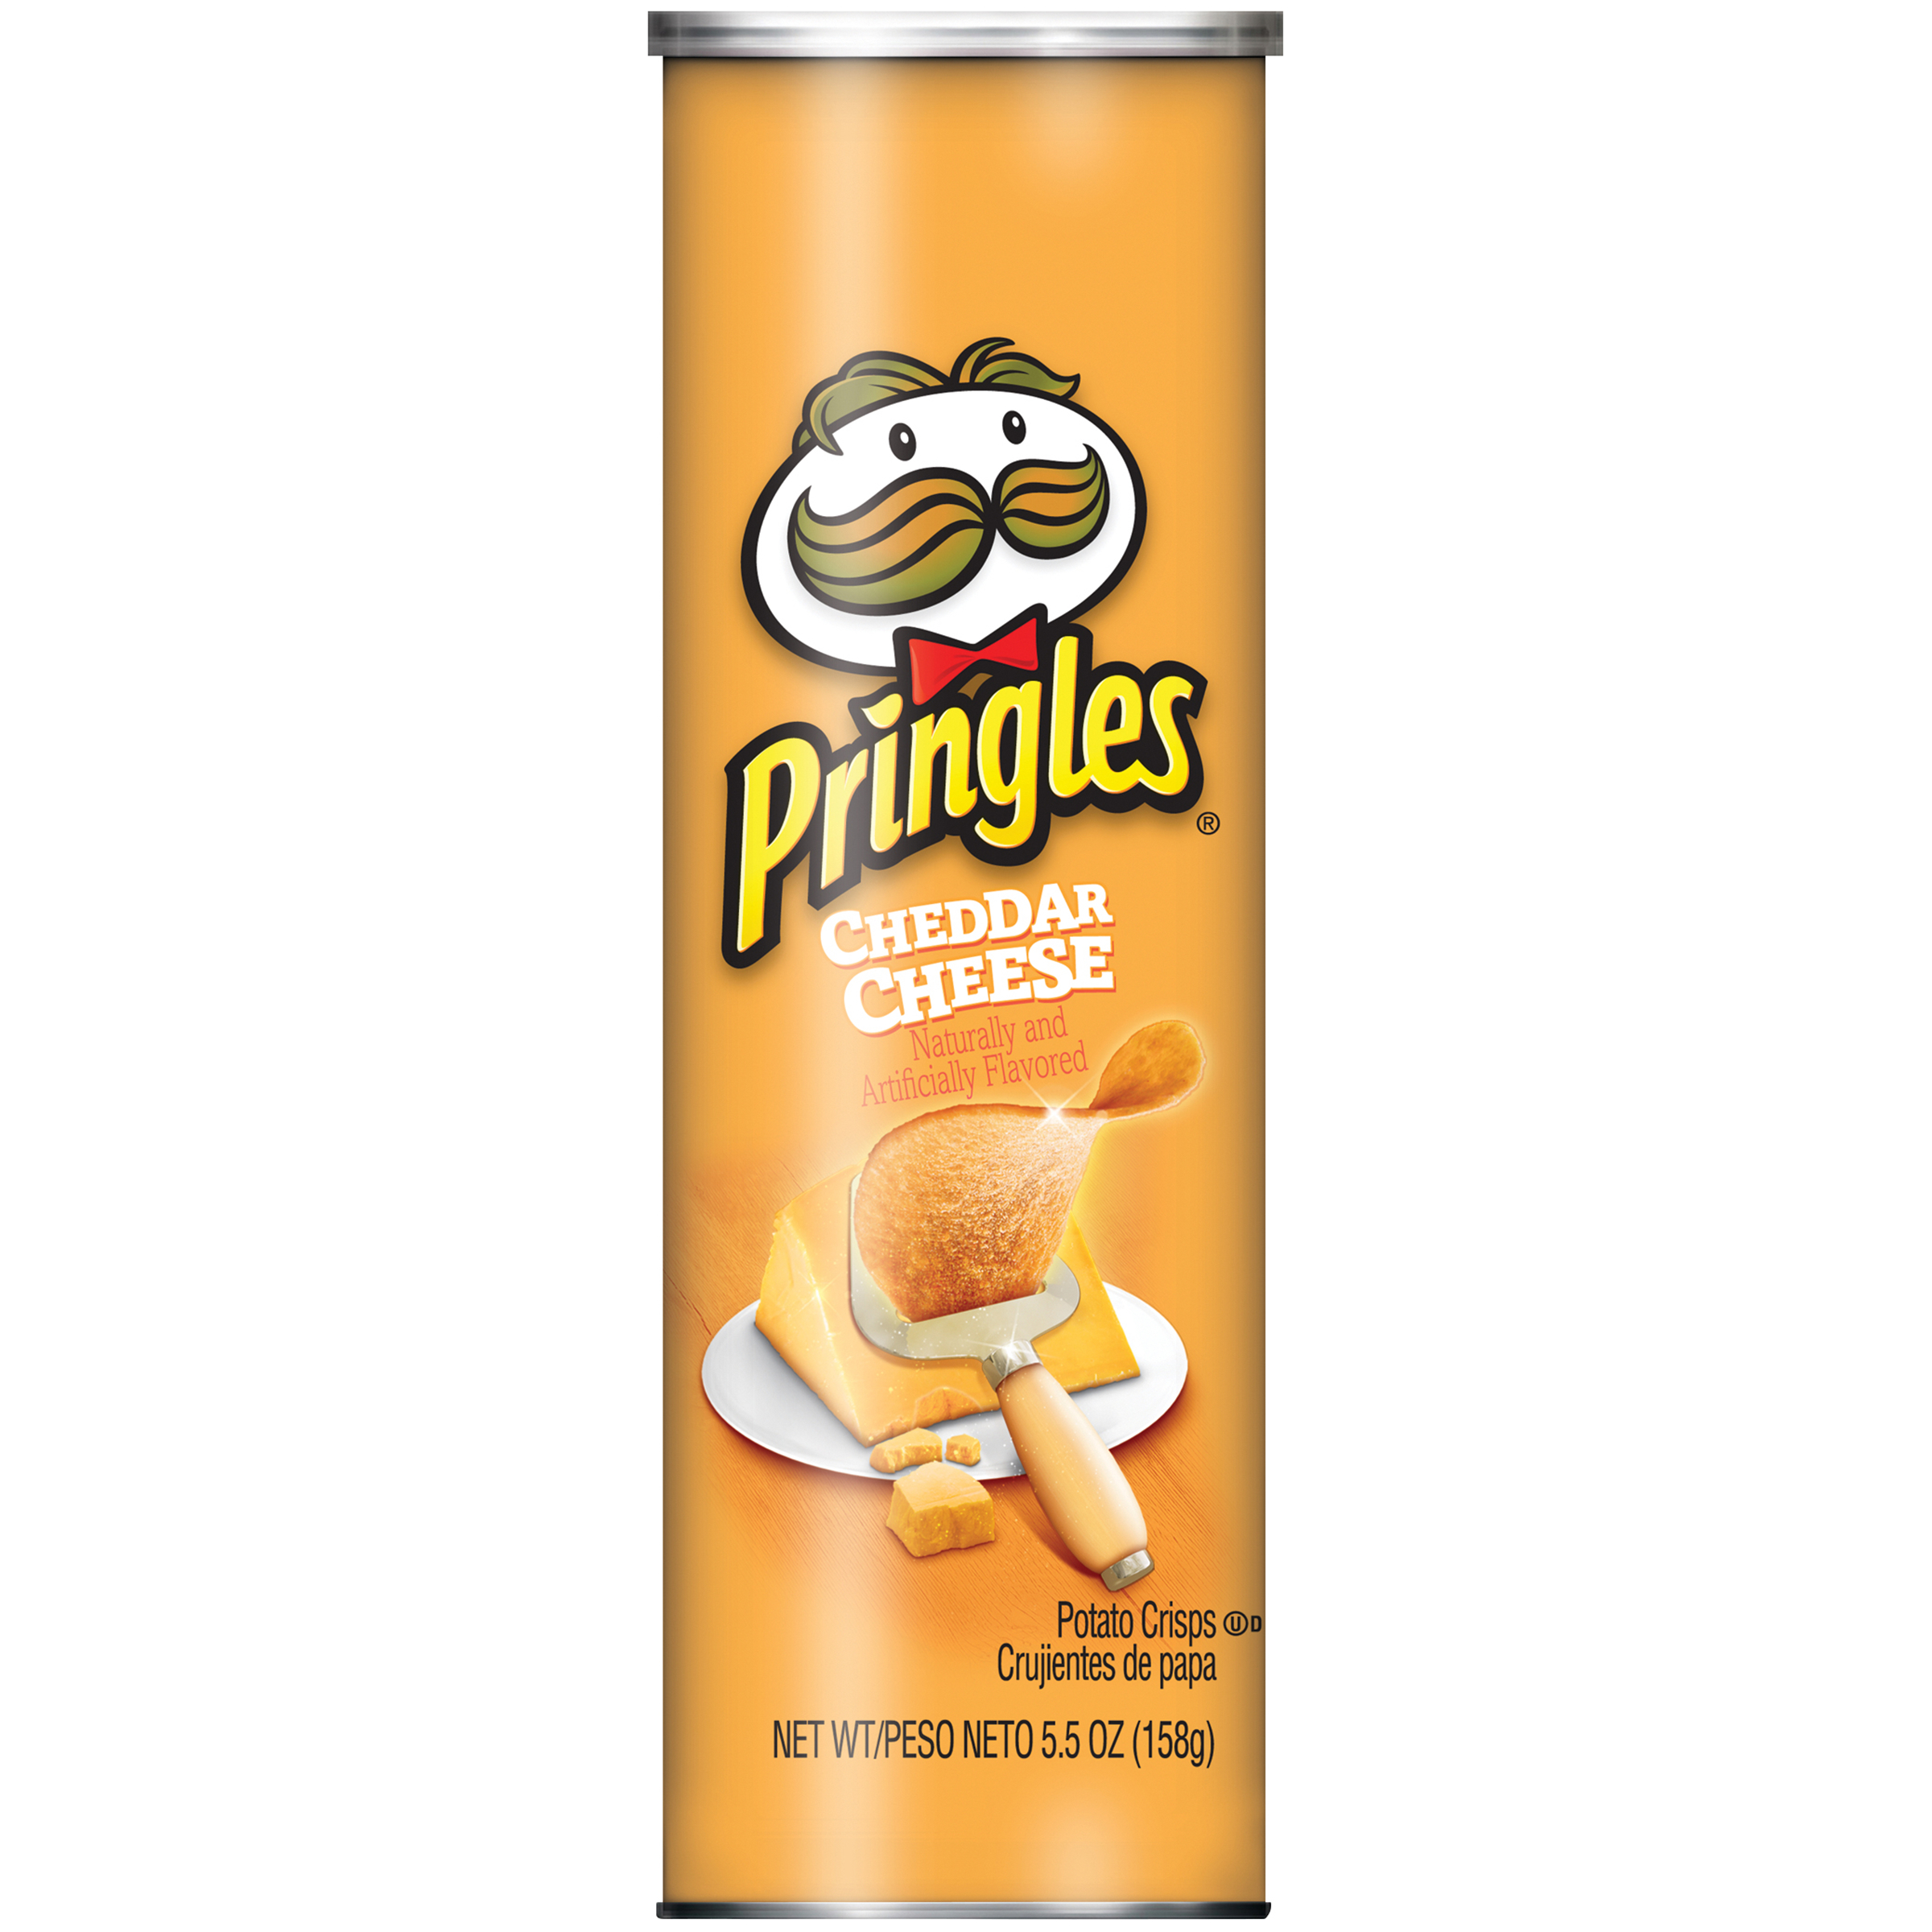 Pringles Potato Crisps Chips, Cheddar Cheese Flavored, 5.5 oz Can